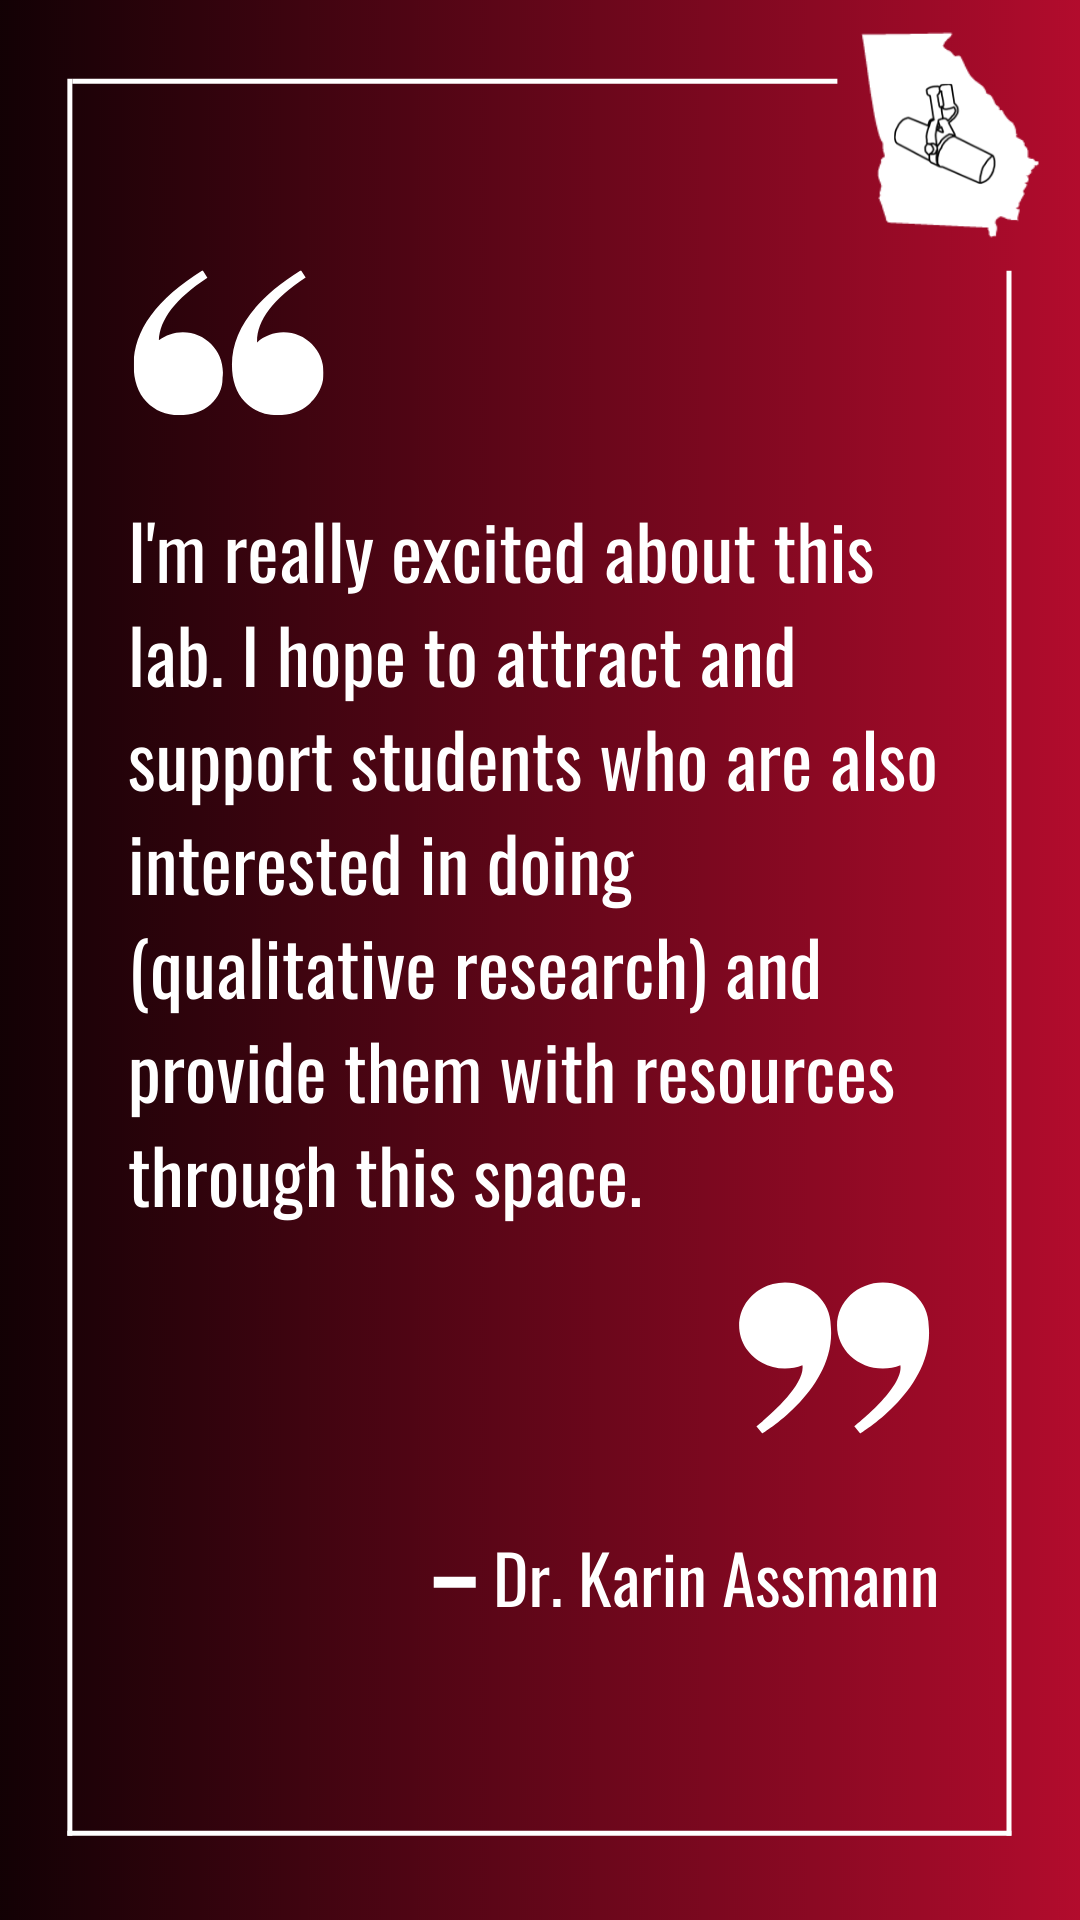 A quote graphic that reads "I'm really excited about this lab. I hope to attract and support students who are also interested in doing qualitative research and provide them with resources through this space." 